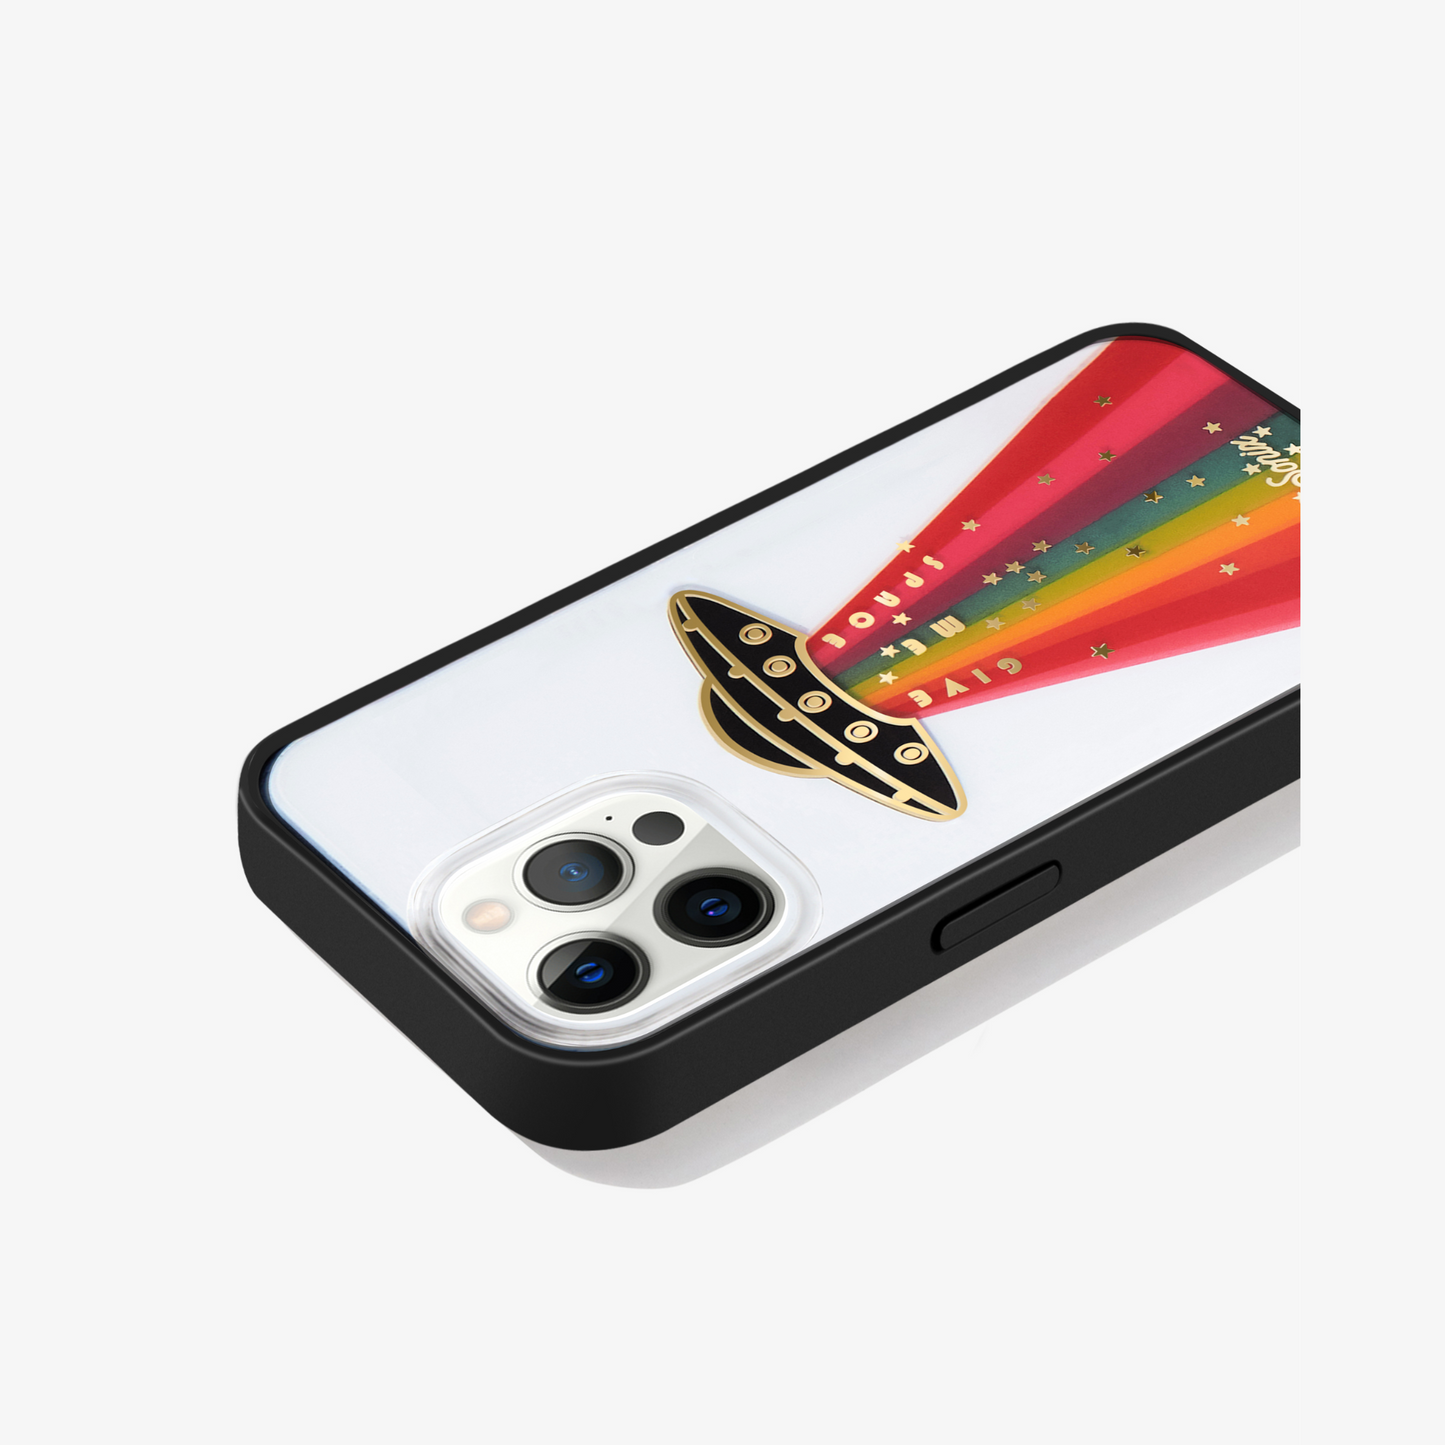 a rainbow ufo design and the words "give me space" with gold foiling and a black bumper shown on an iphone 13 pro max